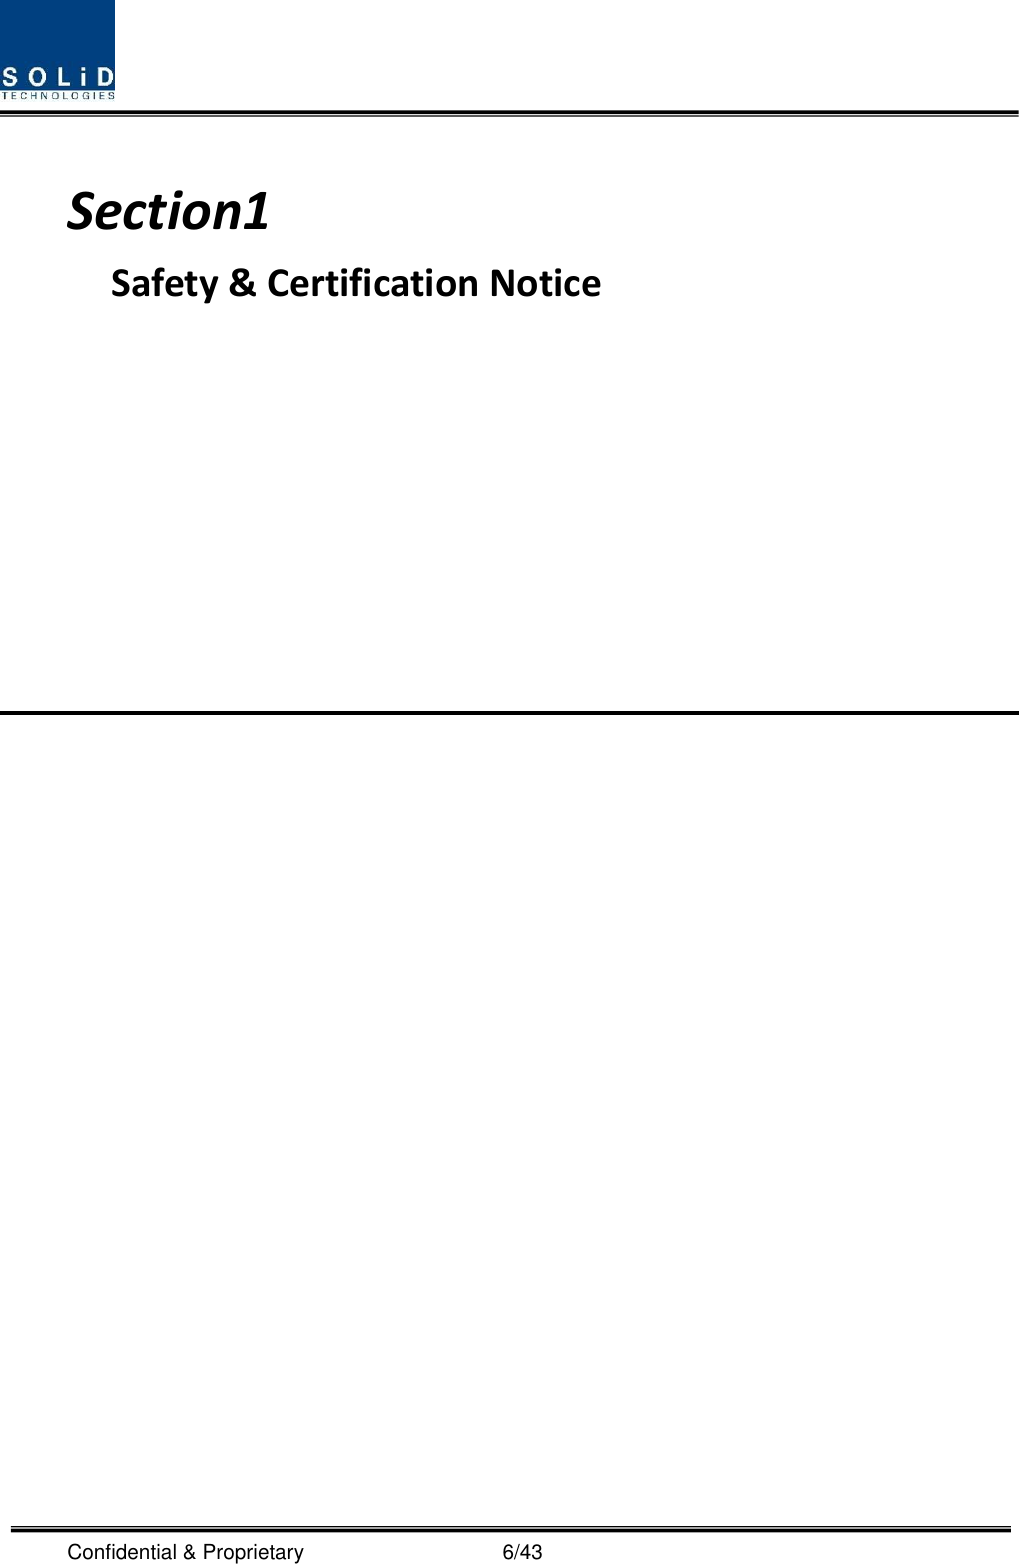  Confidential &amp; Proprietary                                      6/43  Section1                                             Safety &amp; Certification Notice                                